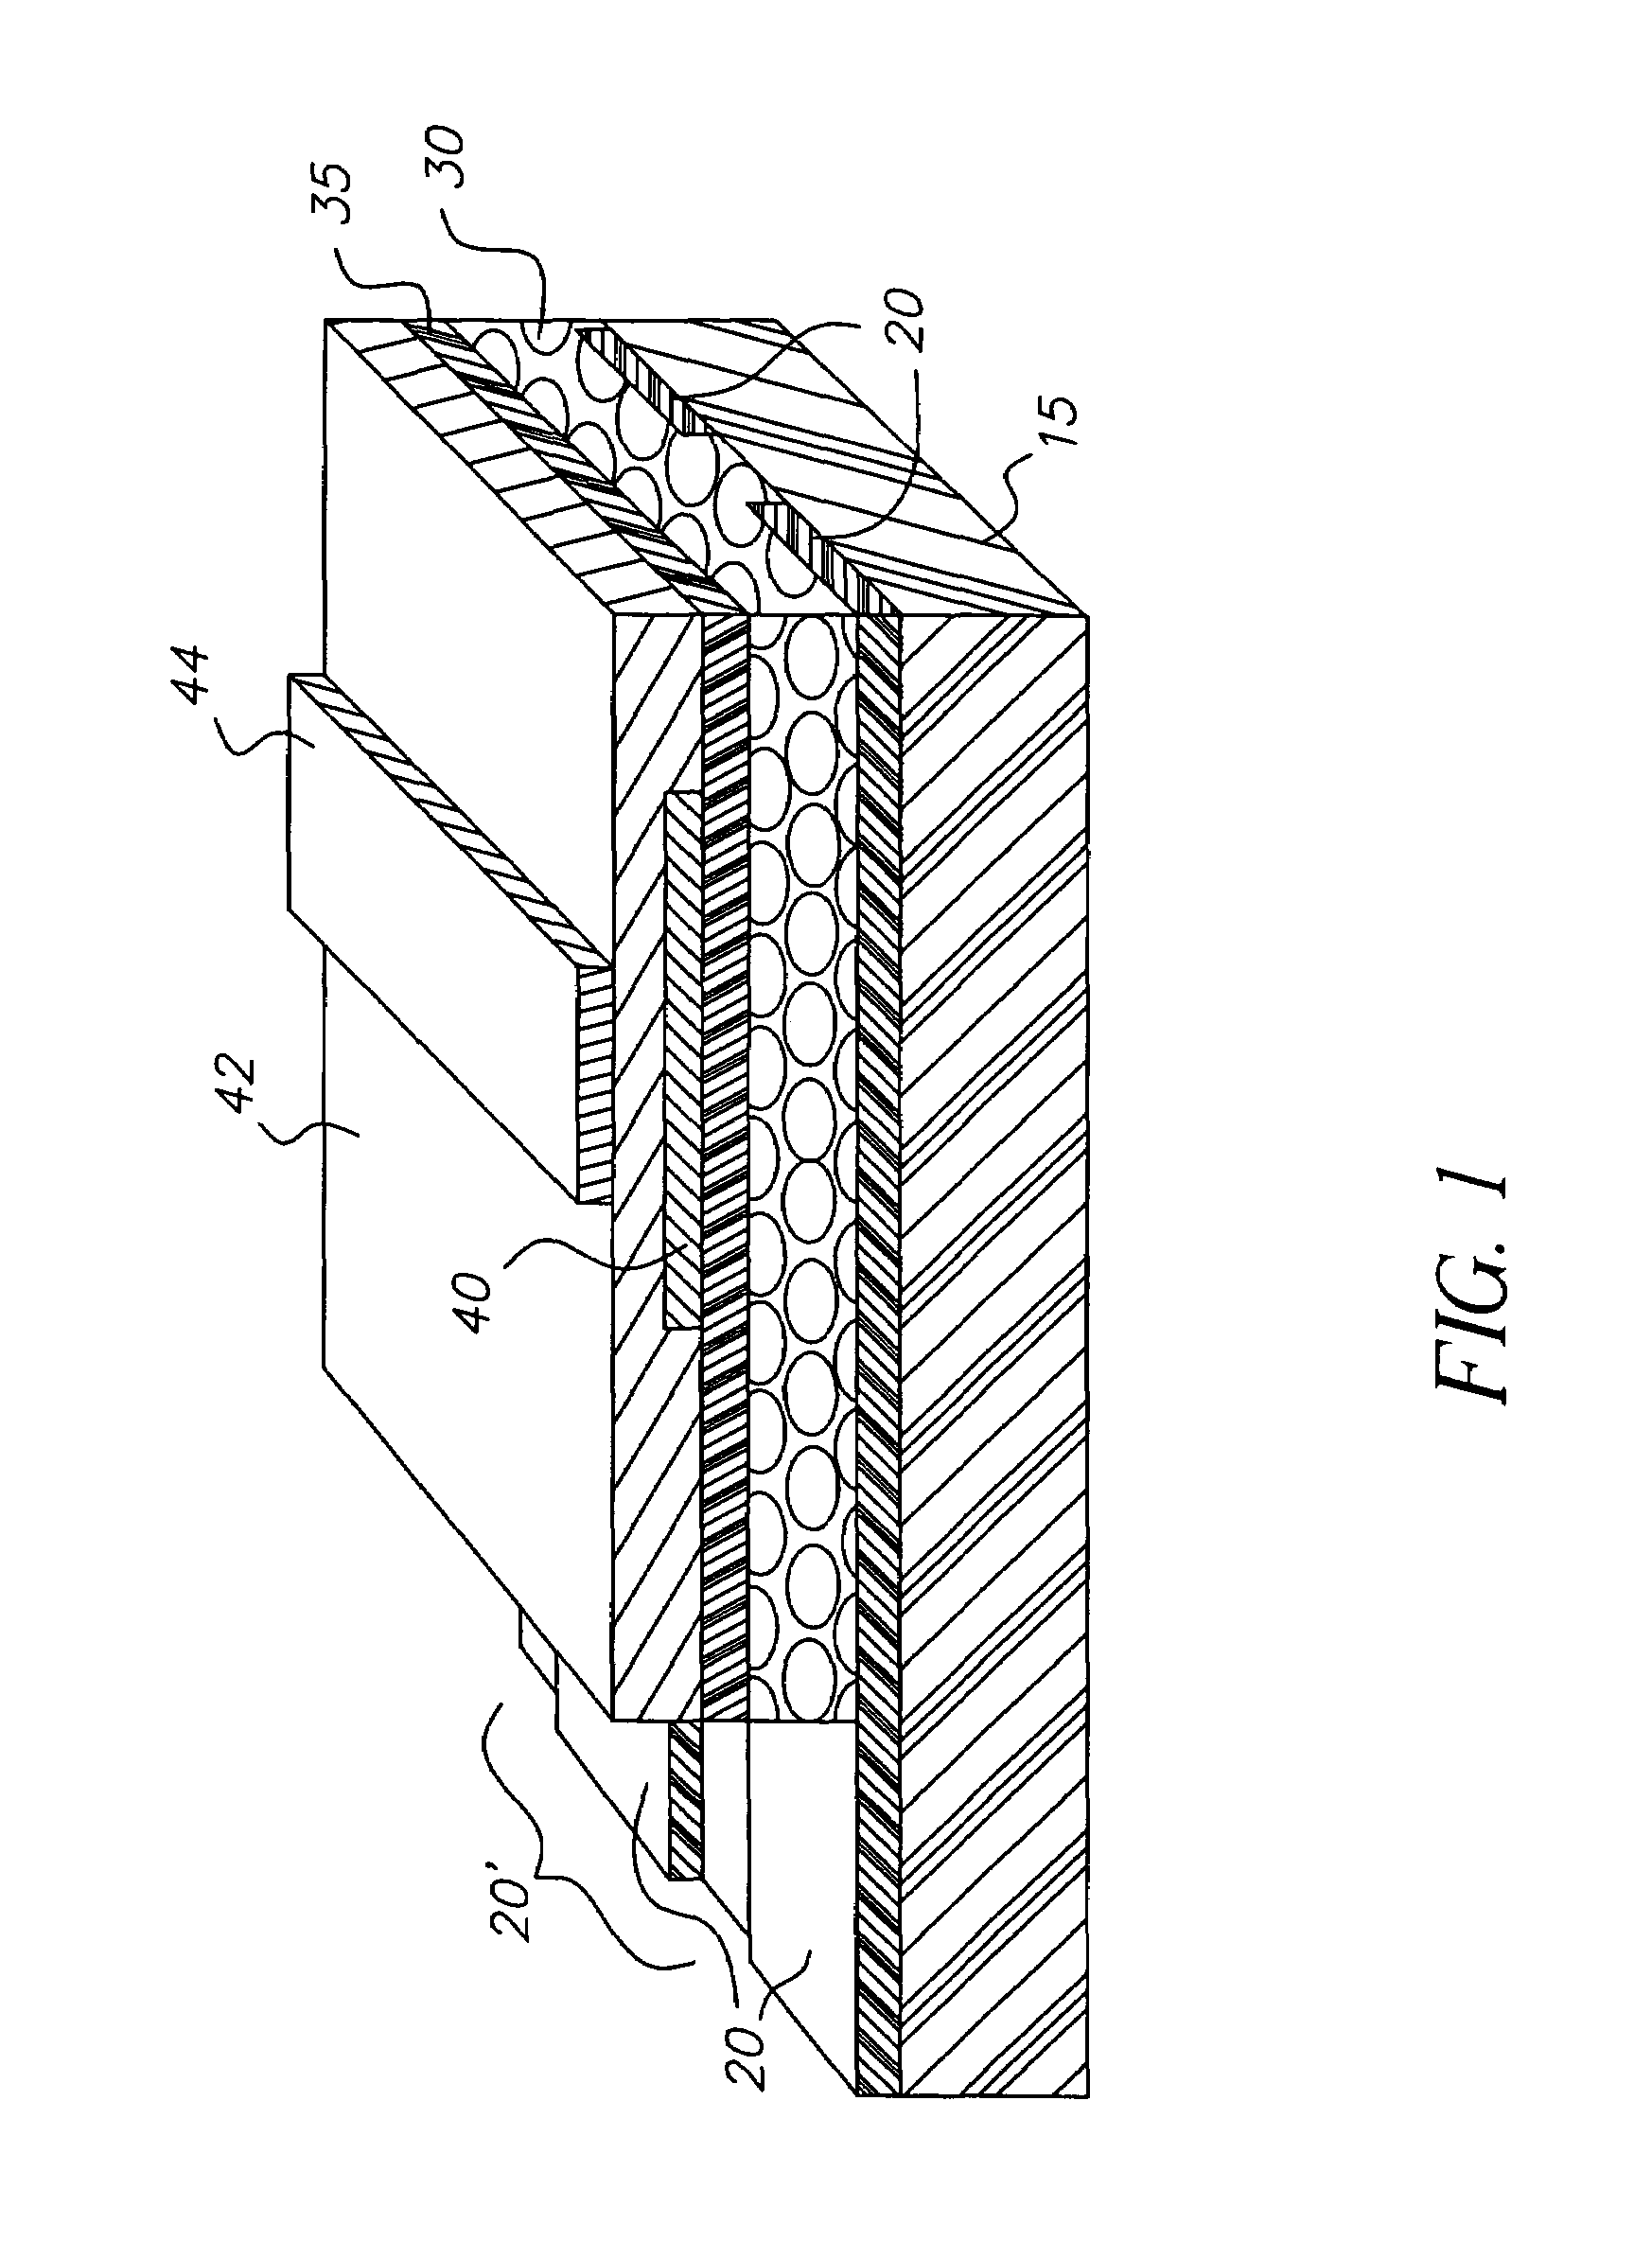 Mixed absorber layer for displays